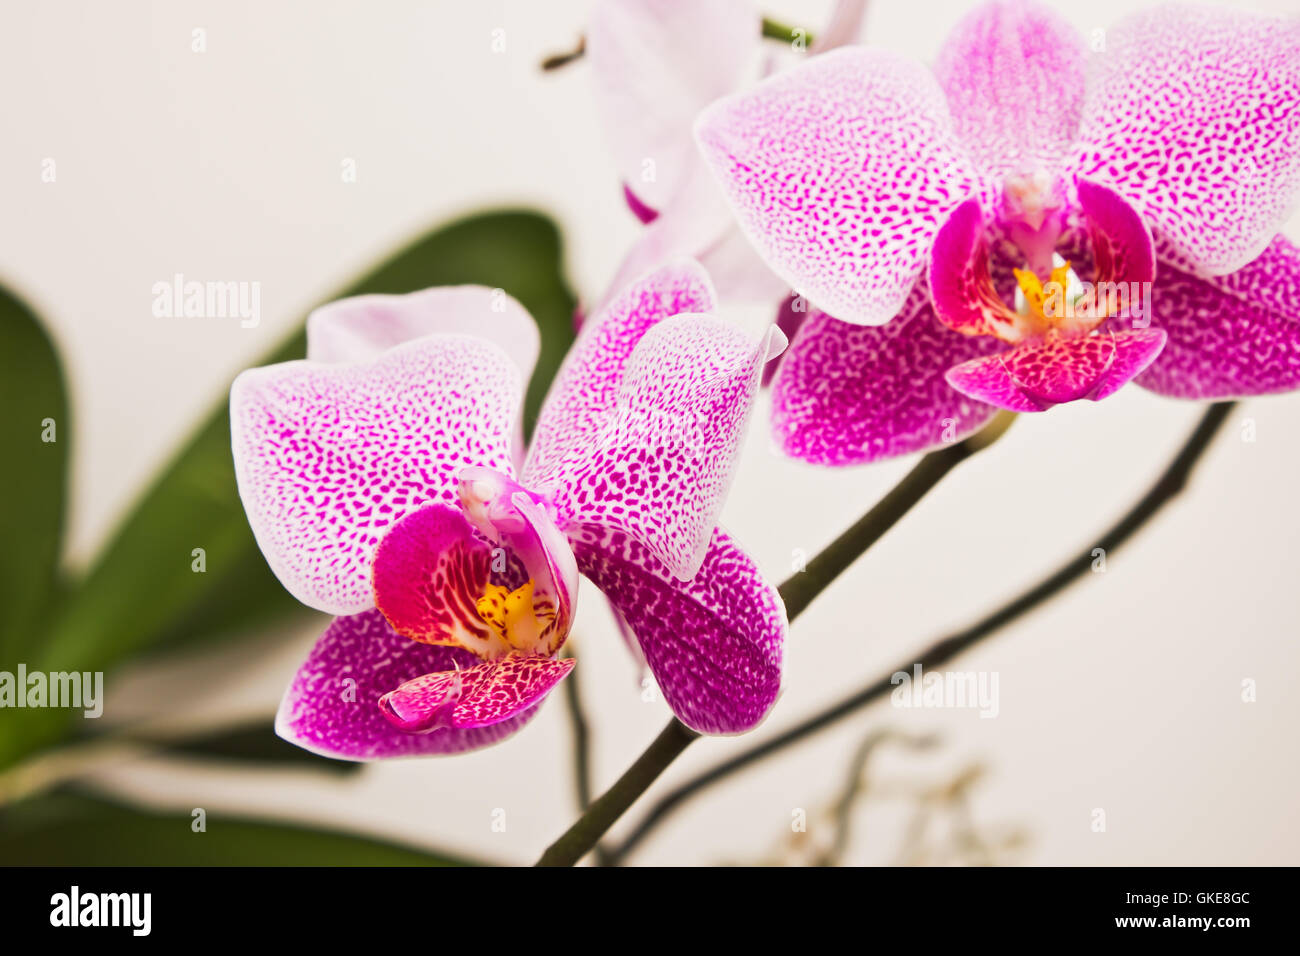 flowers orchids Stock Photo